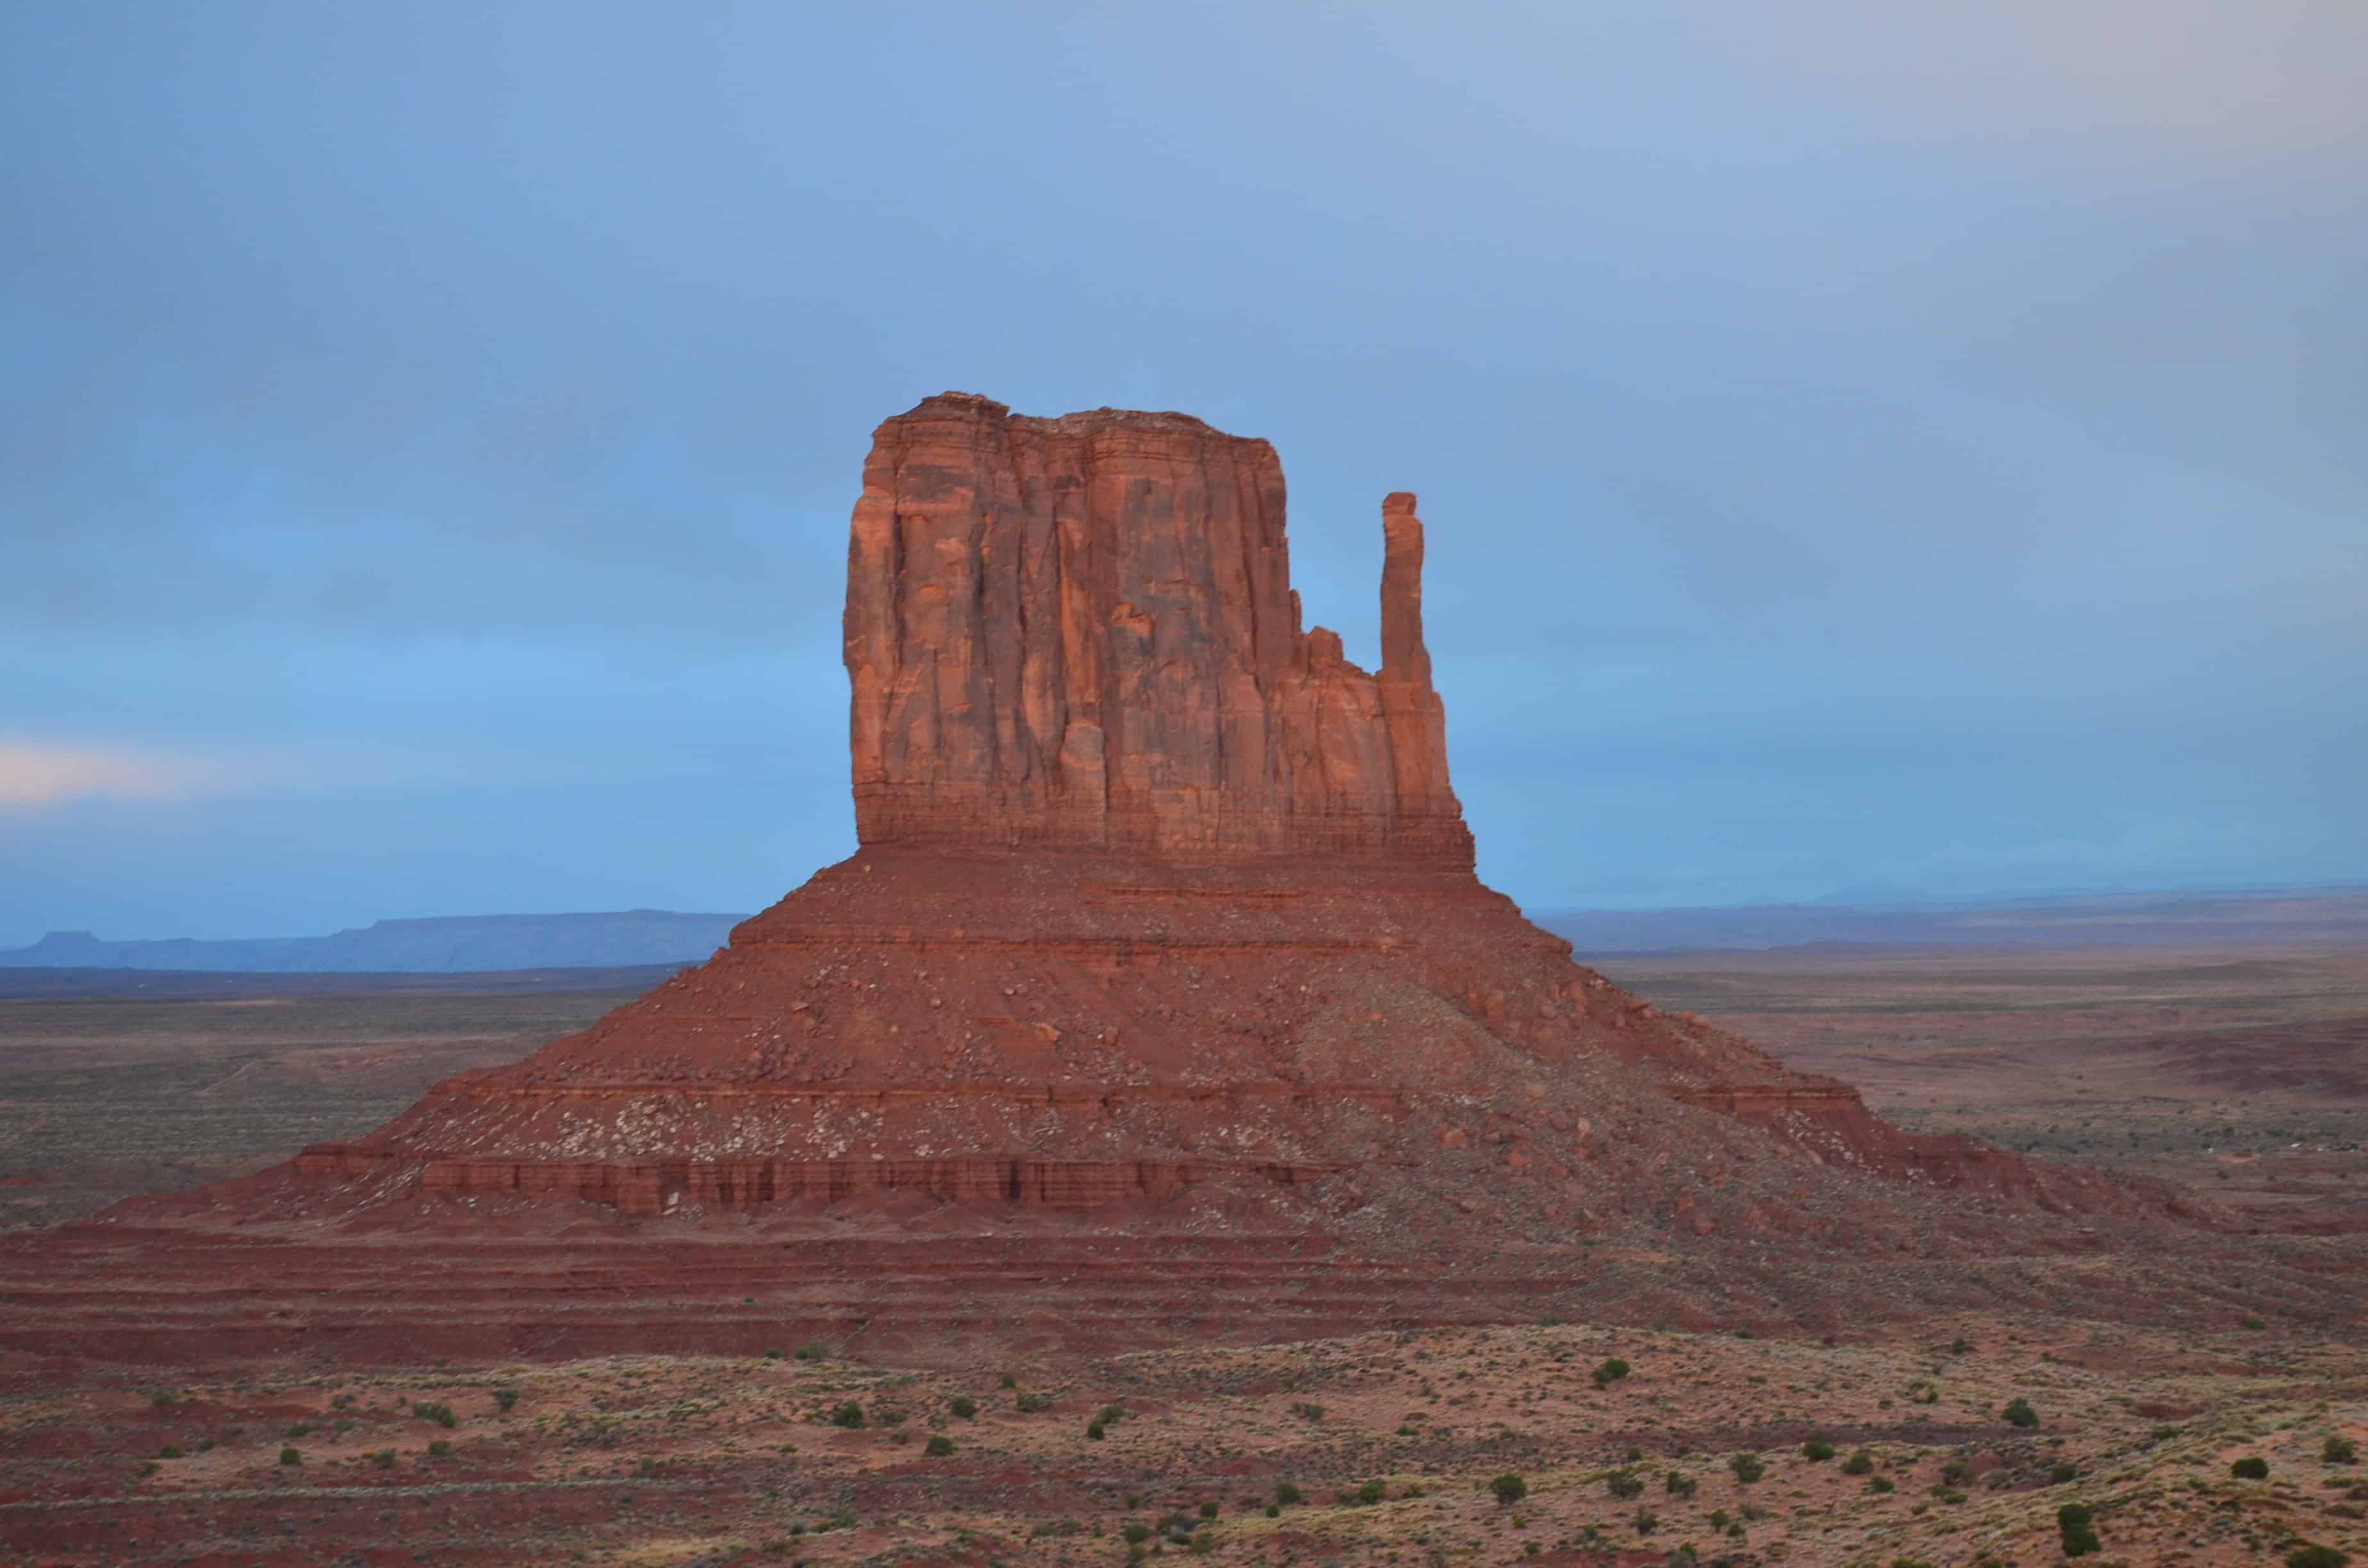 West Mitten Butte at Monument Valley Tribal Park in Arizona